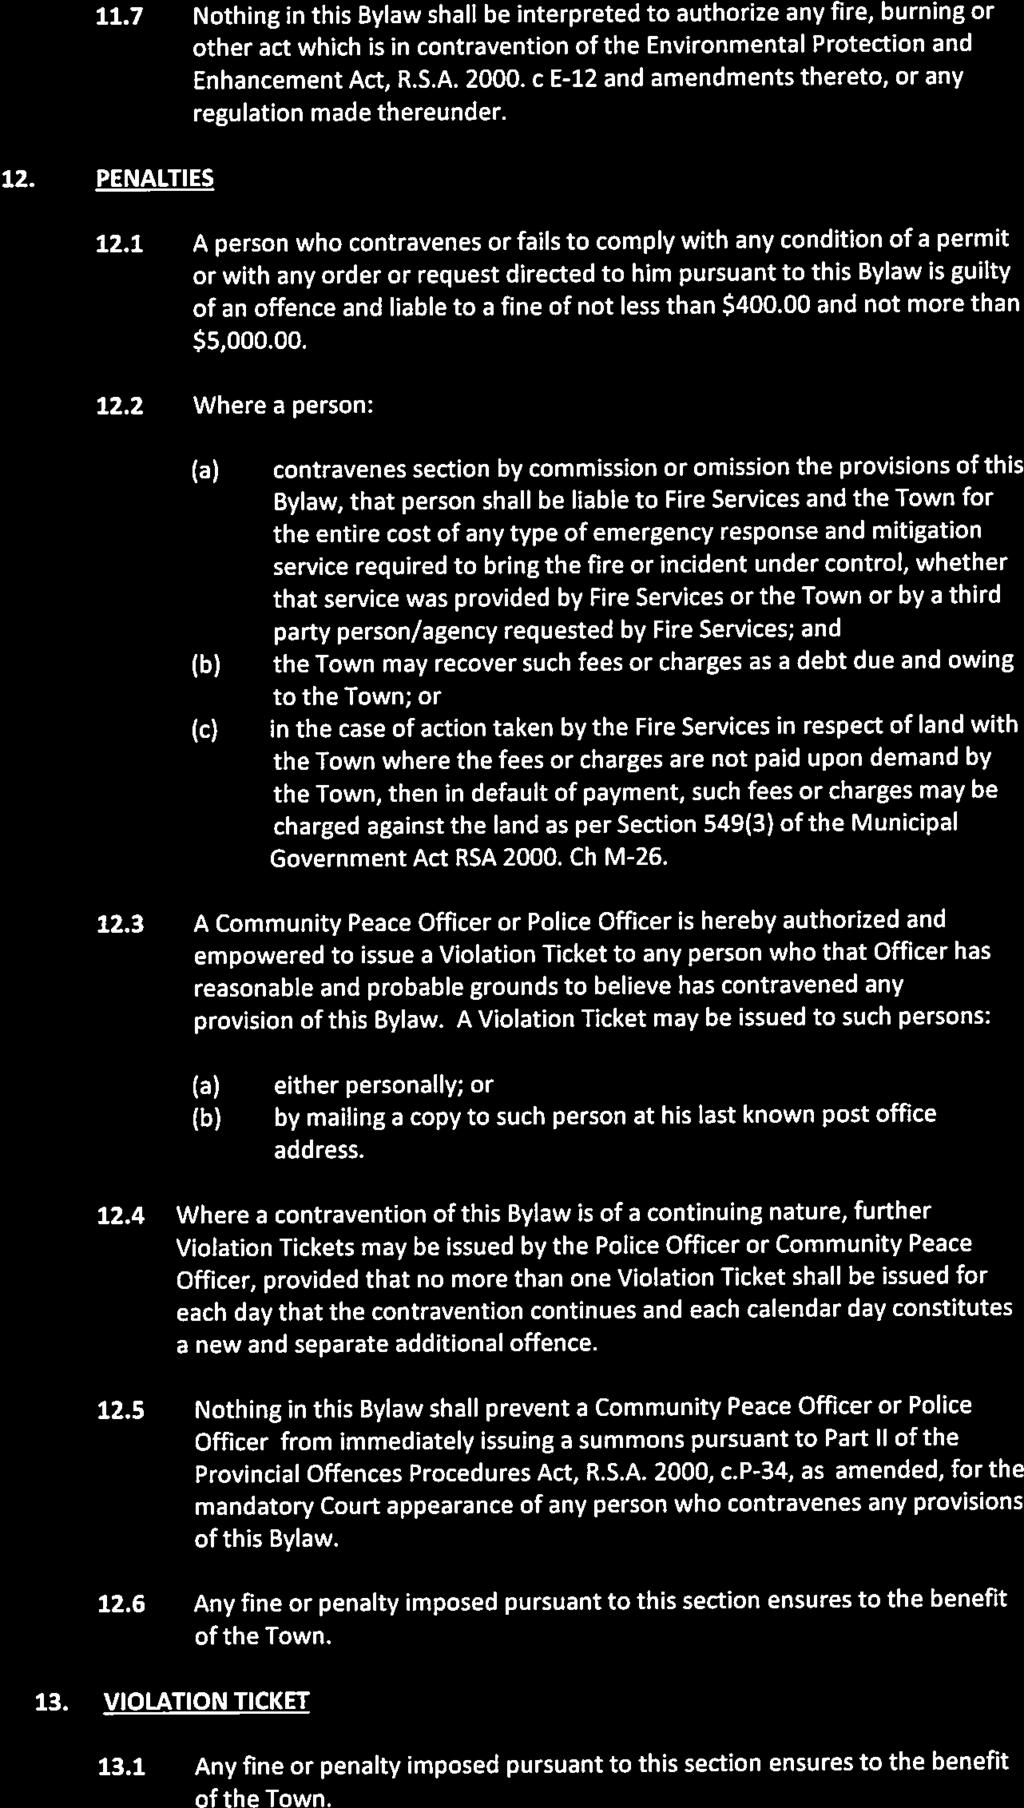 11.7 Nothing in this Bylaw shall be interpreted to authorize any fire, burning or other act which is in contravention of the Environmental Protection and Enhancement Act, R.S.A. 2000.